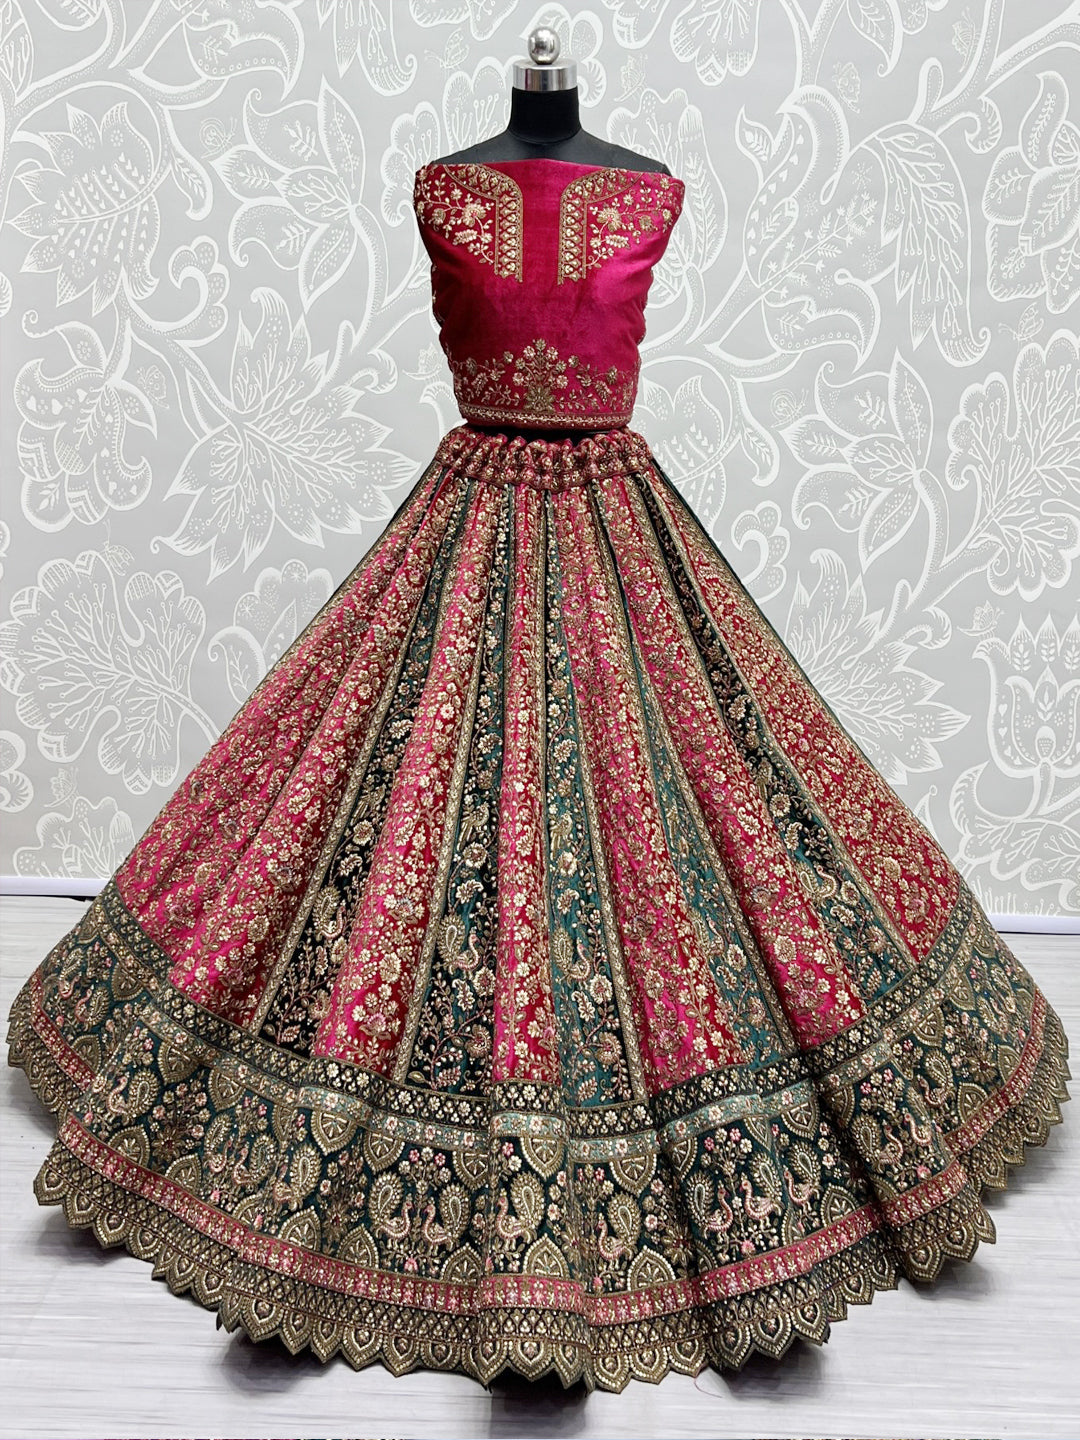 Embroidered Velvet Bridal Lehenga with Double Chunni in Multicolor-81810